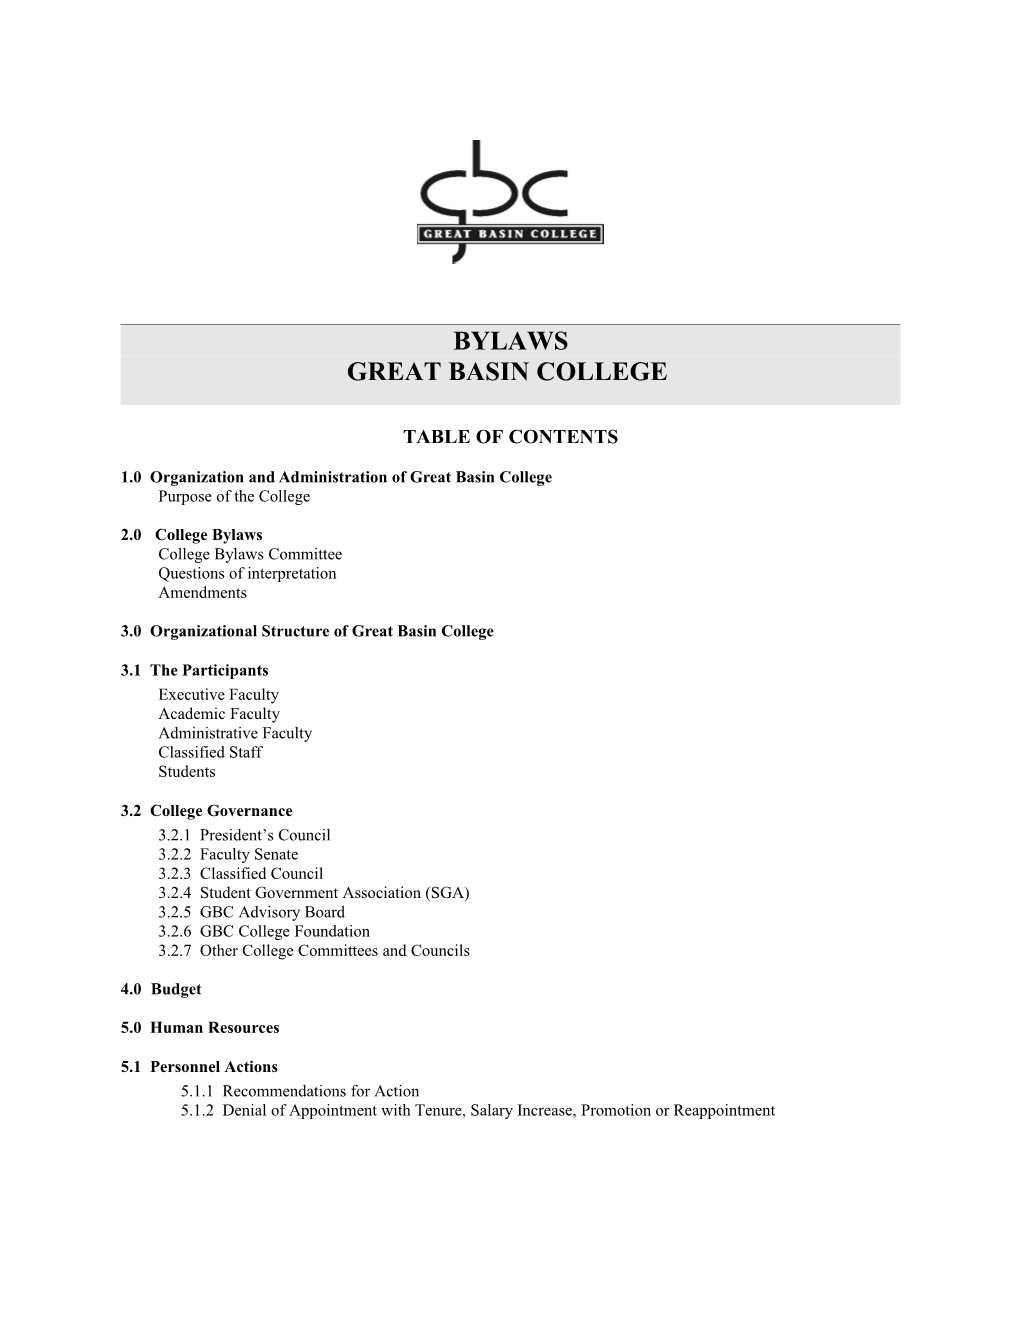 1.0 Organization and Administration of Great Basincollege